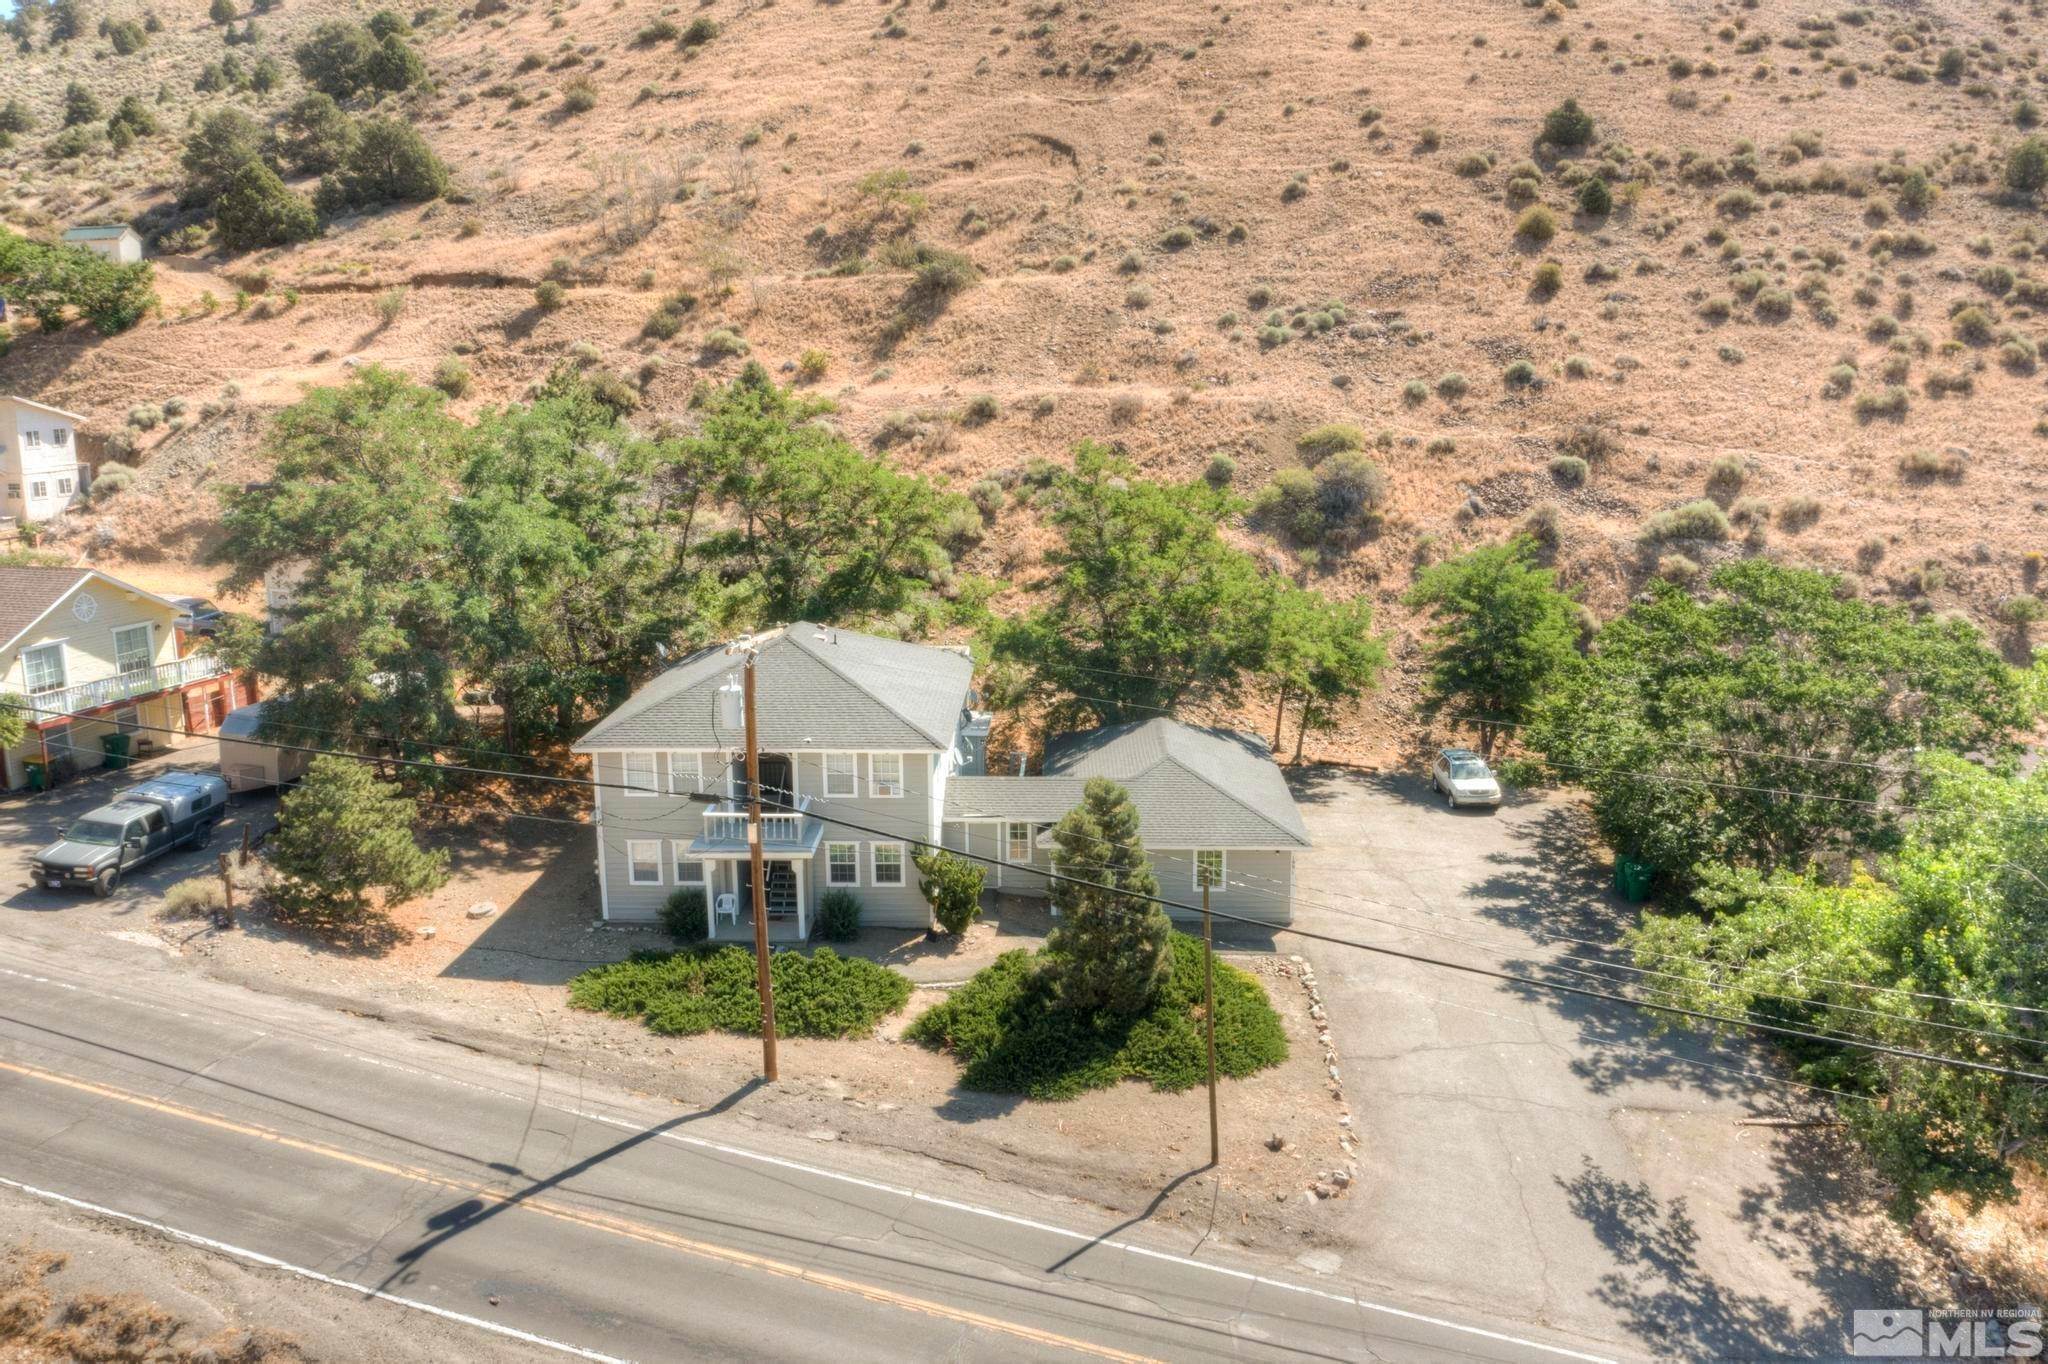 Duplex / Multiplex for Active at 1991 Main Street Silver City, Nevada 89440 United States